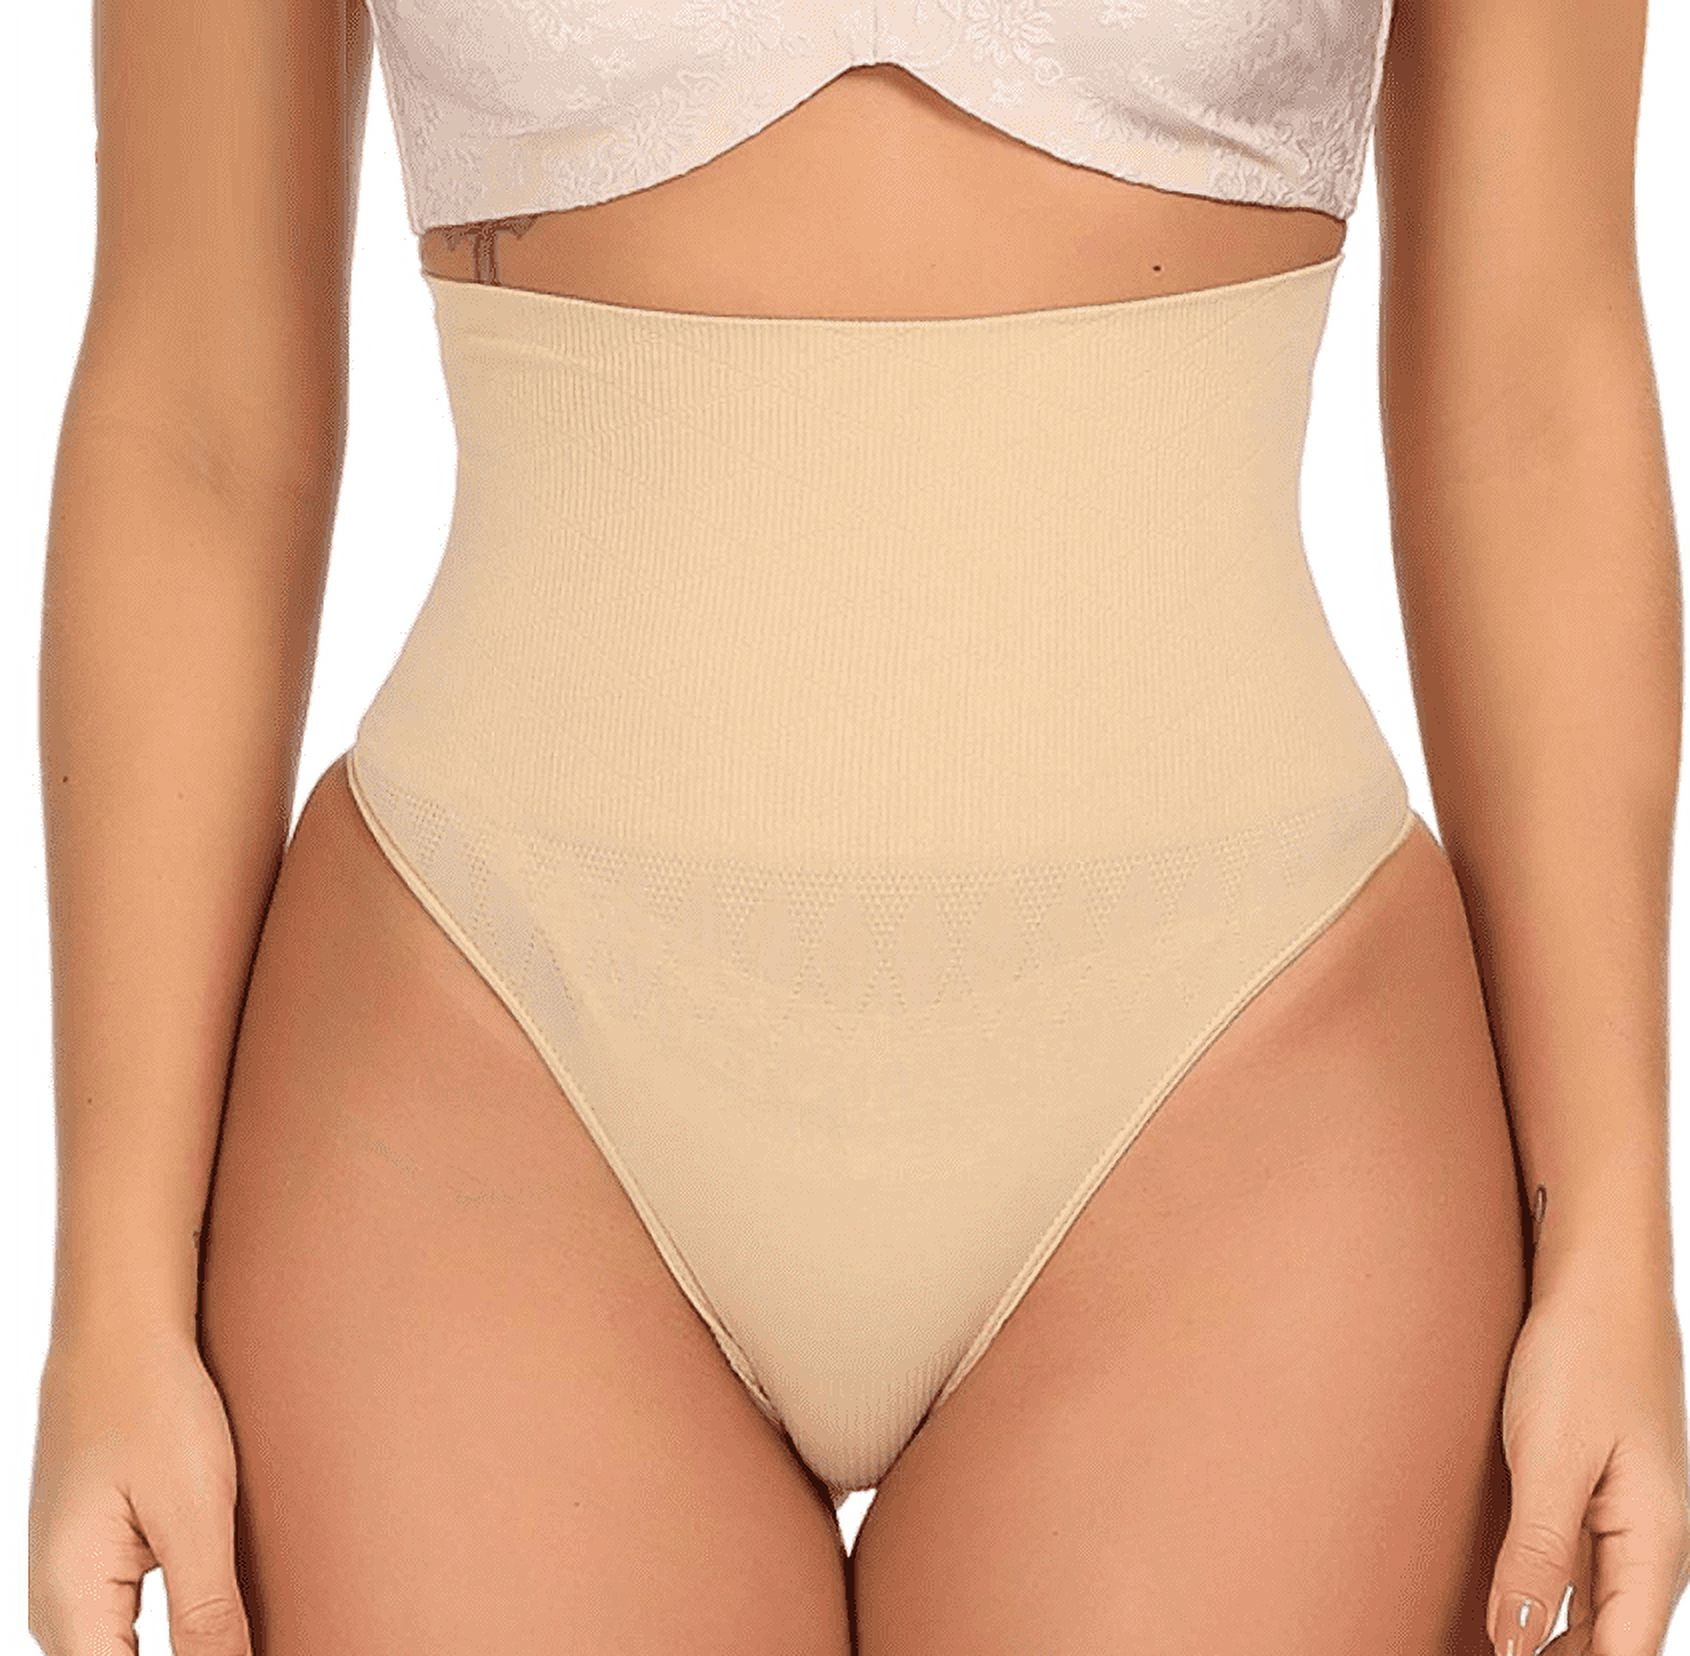 Premium Photo  Isolated of Thong Shapewear High Waisted Briefs